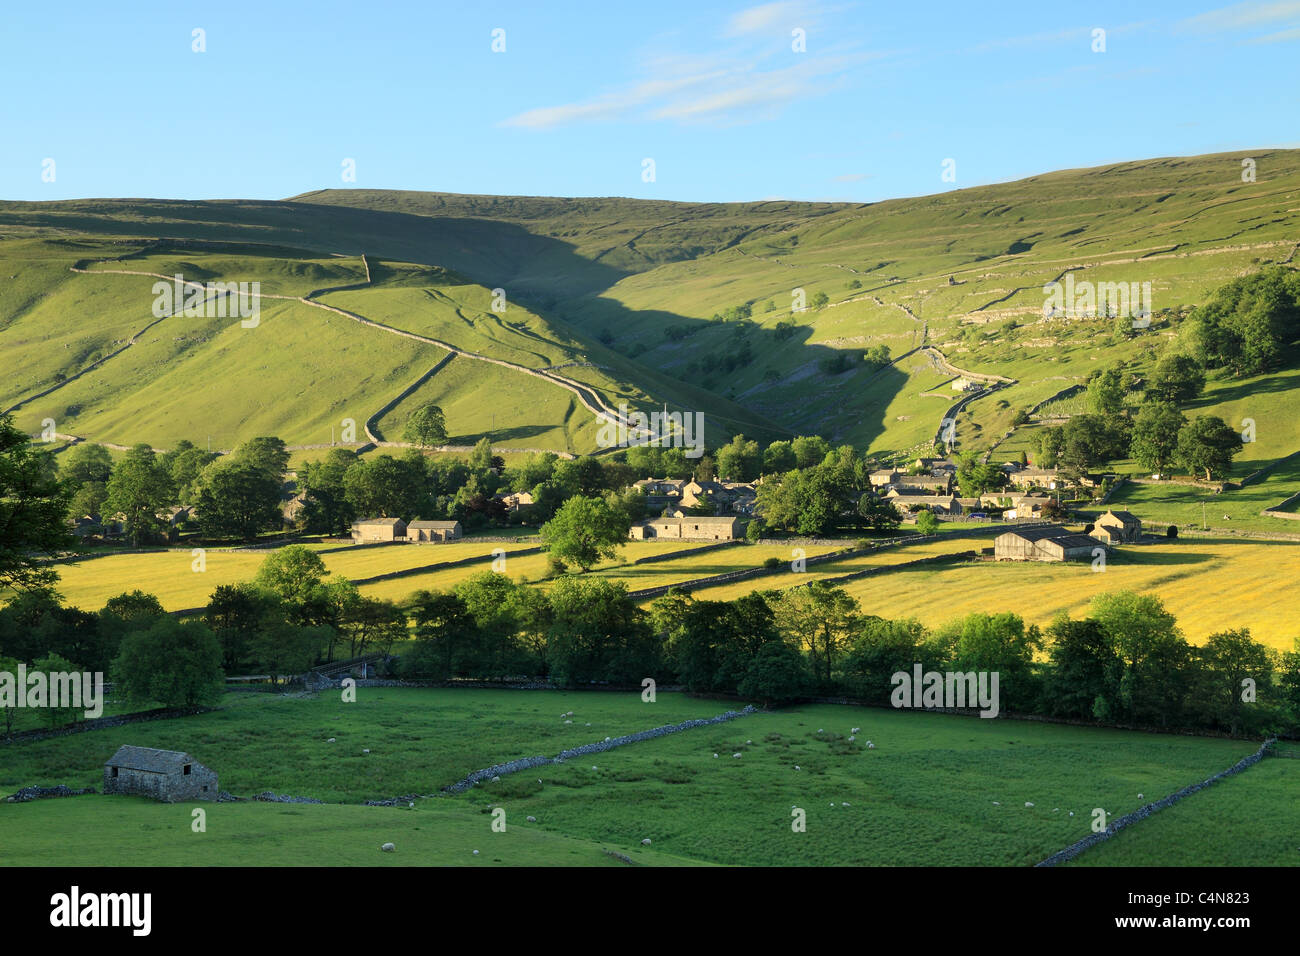 The village of Starbotton, in Upper-Wharfedale in the Yorkshire Dales National Park, England Stock Photo